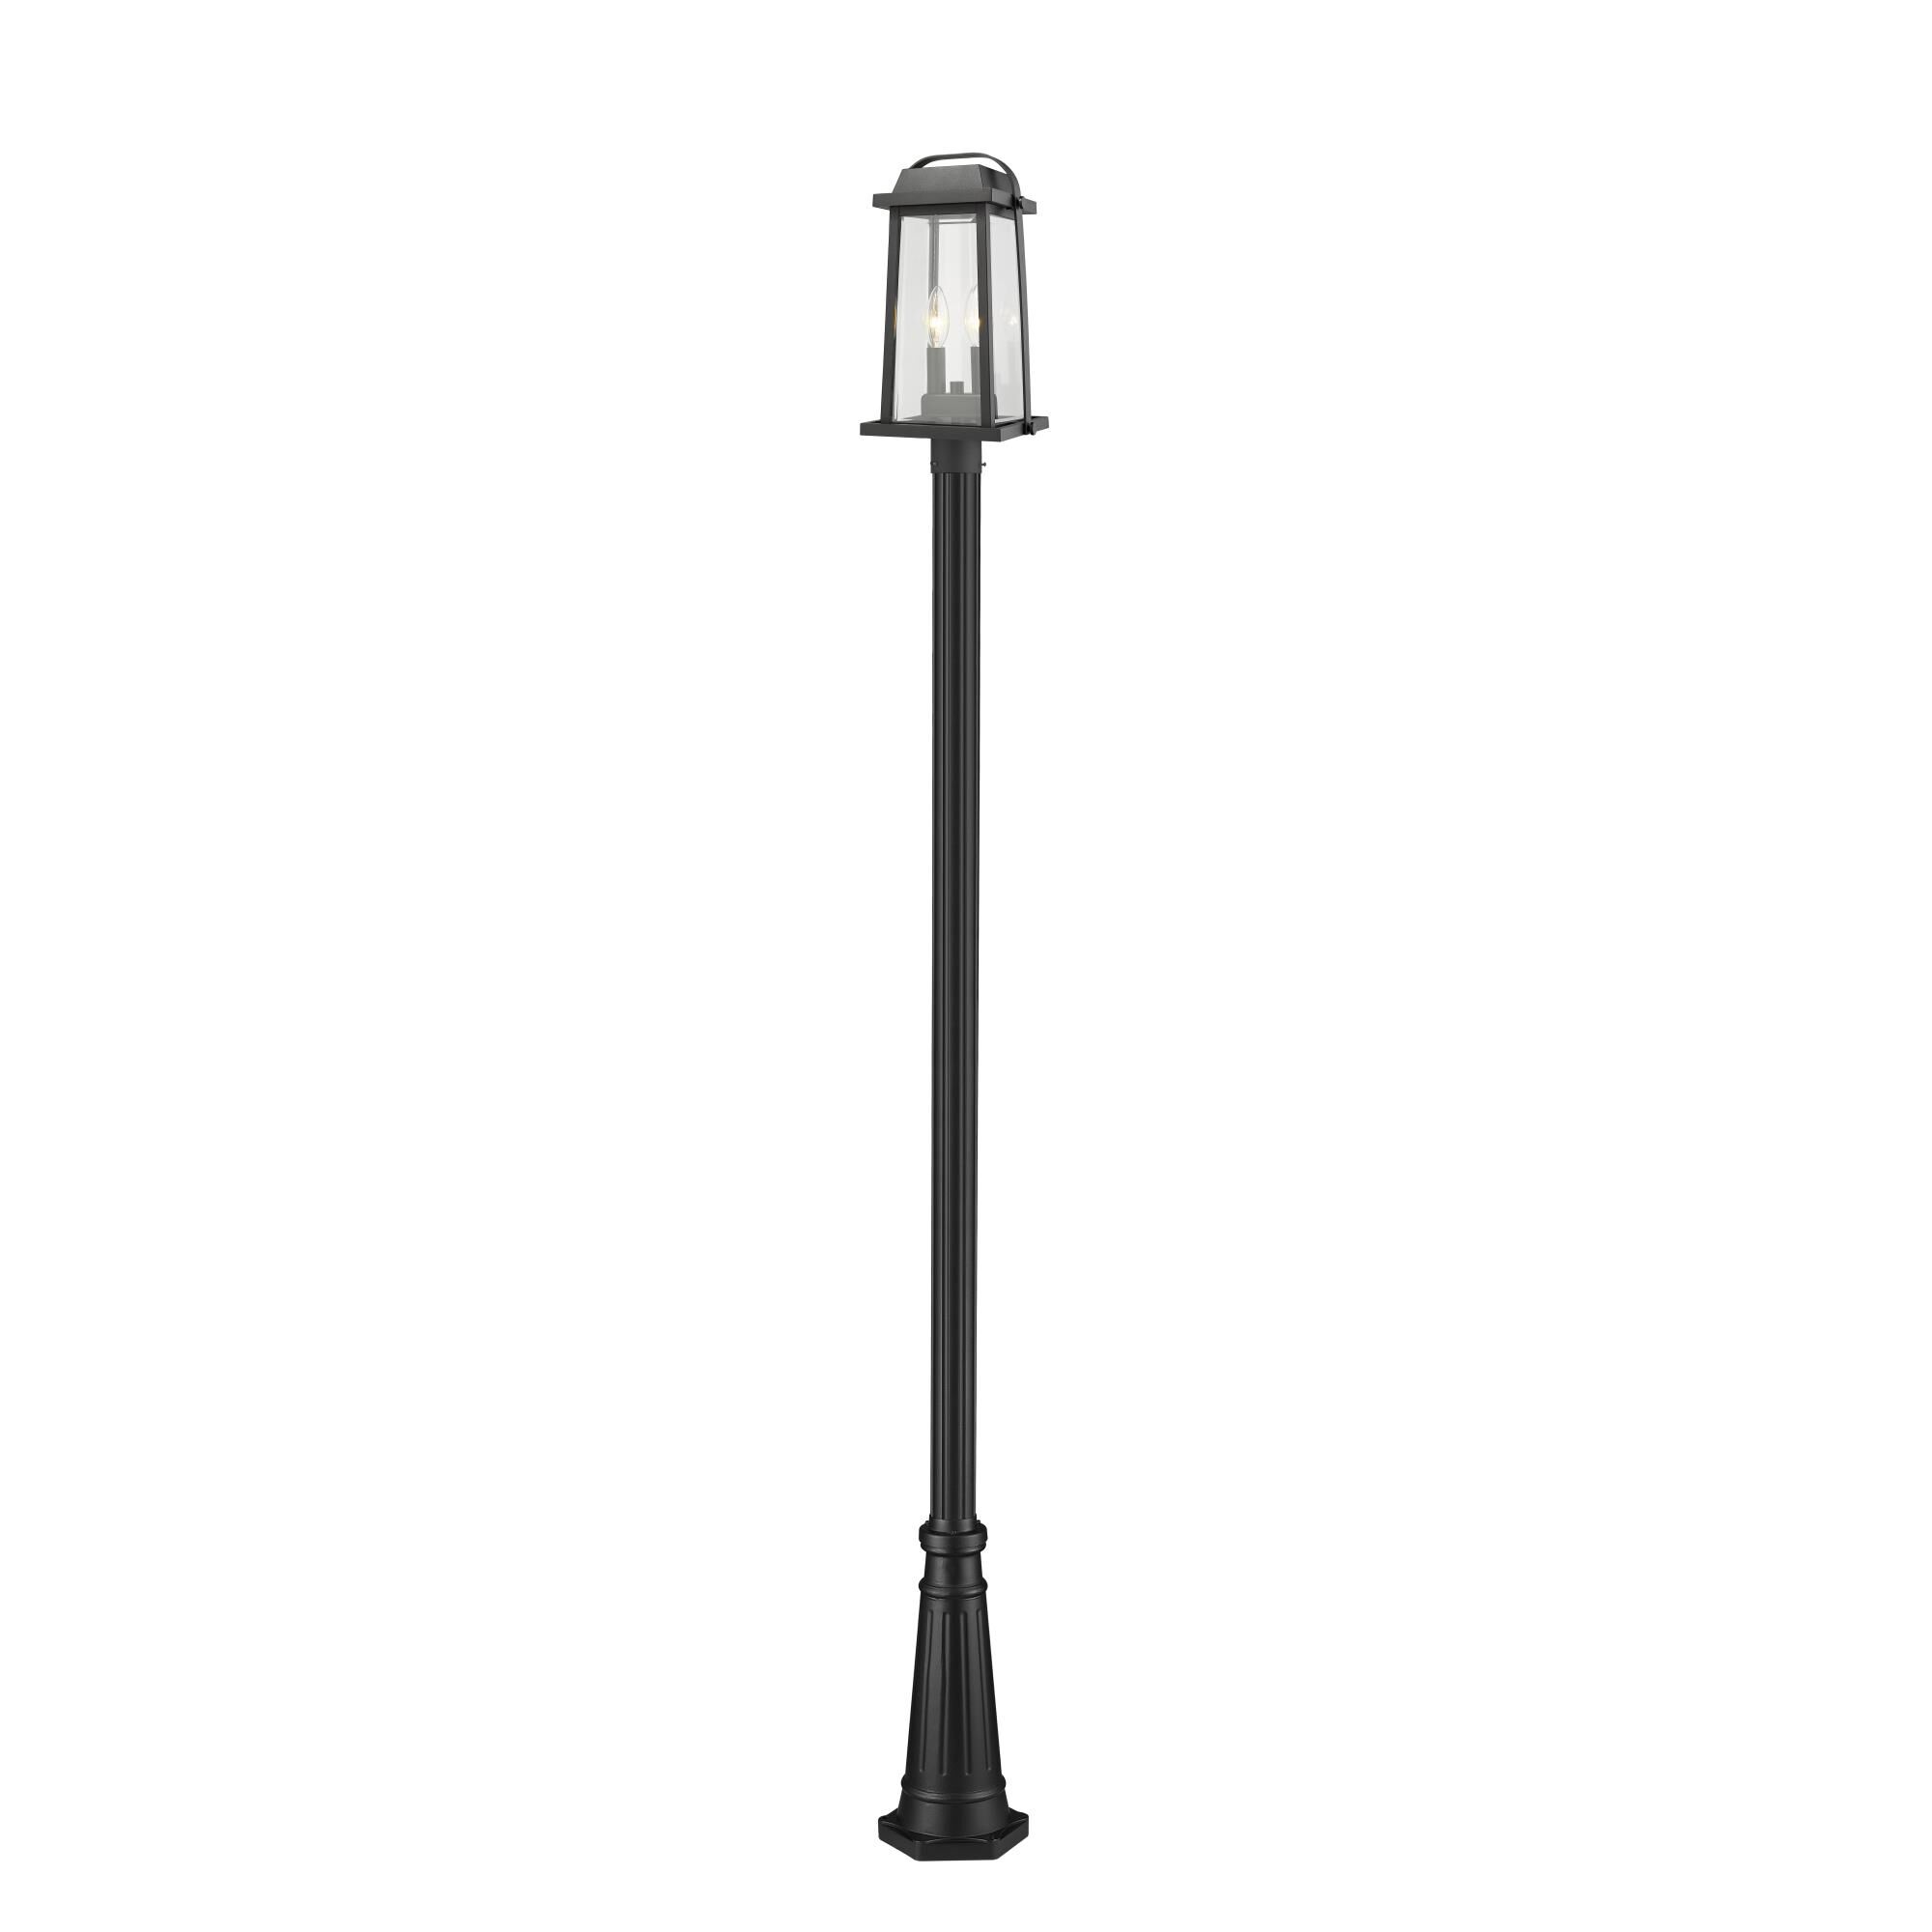 Photos - Floodlight / Garden Lamps Z-Lite Millworks 110 Inch Tall 2 Light Outdoor Post Lamp Millworks - 574PH